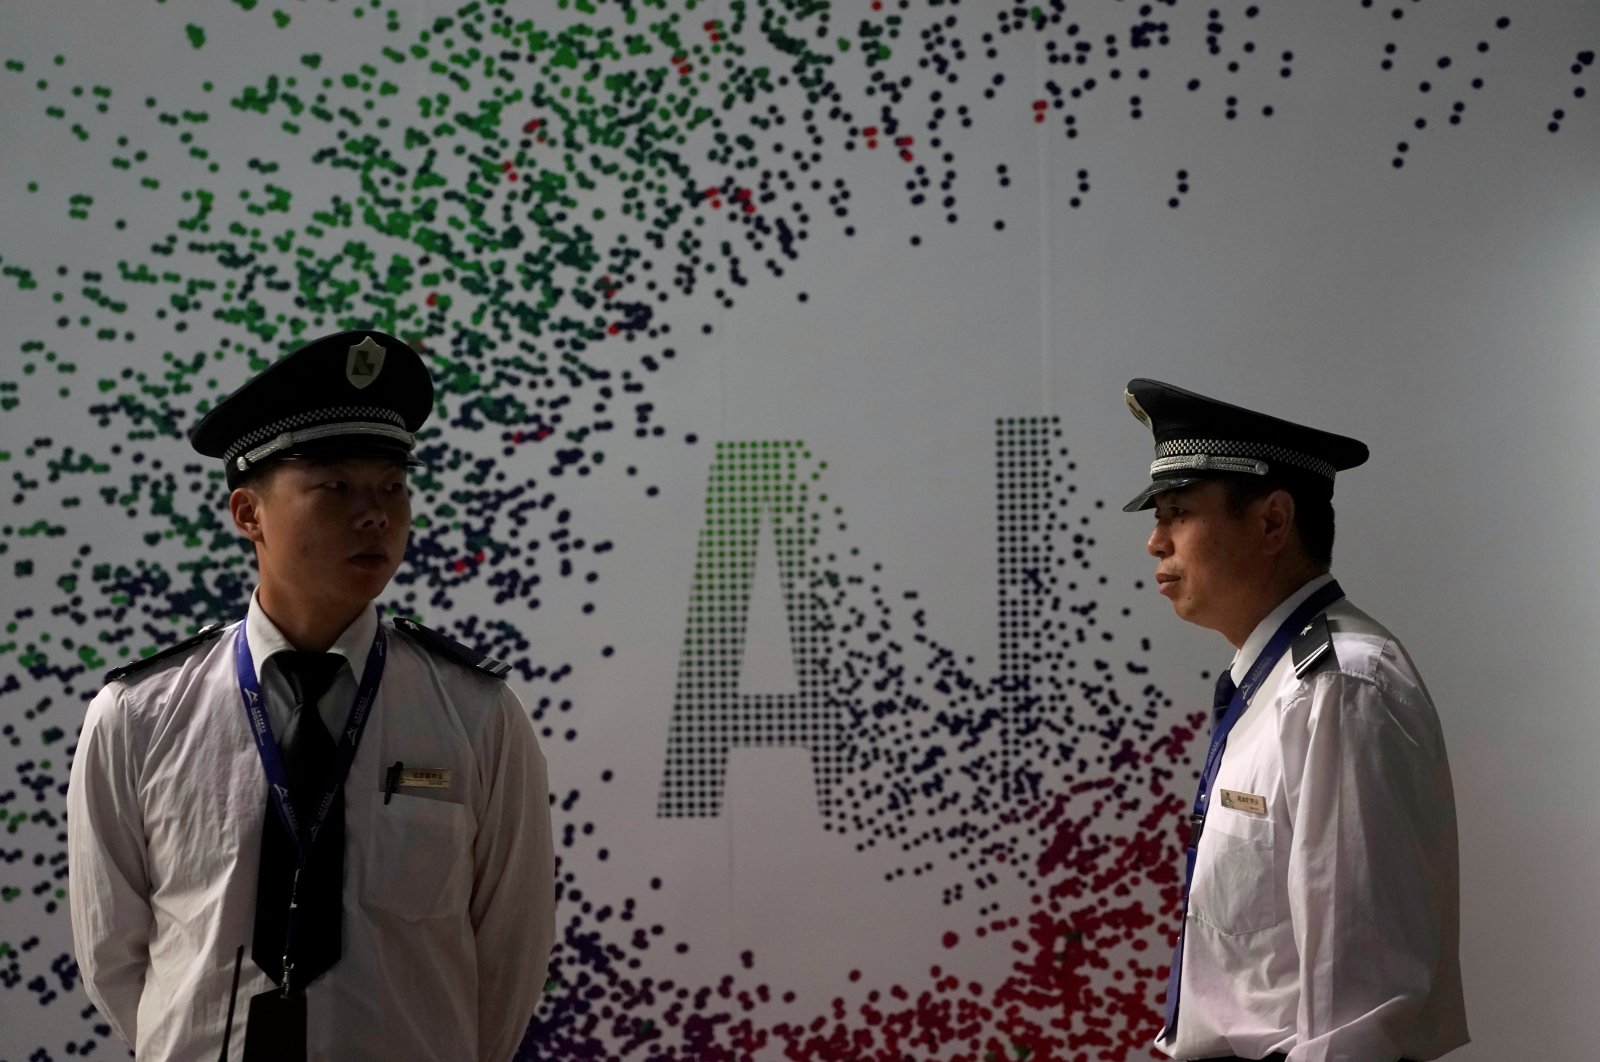 Security officers keep watch in front of an AI (Artificial Intelligence) sign at the annual Huawei Connect event in Shanghai, China, Sept. 18, 2019. (Reuters Photo)